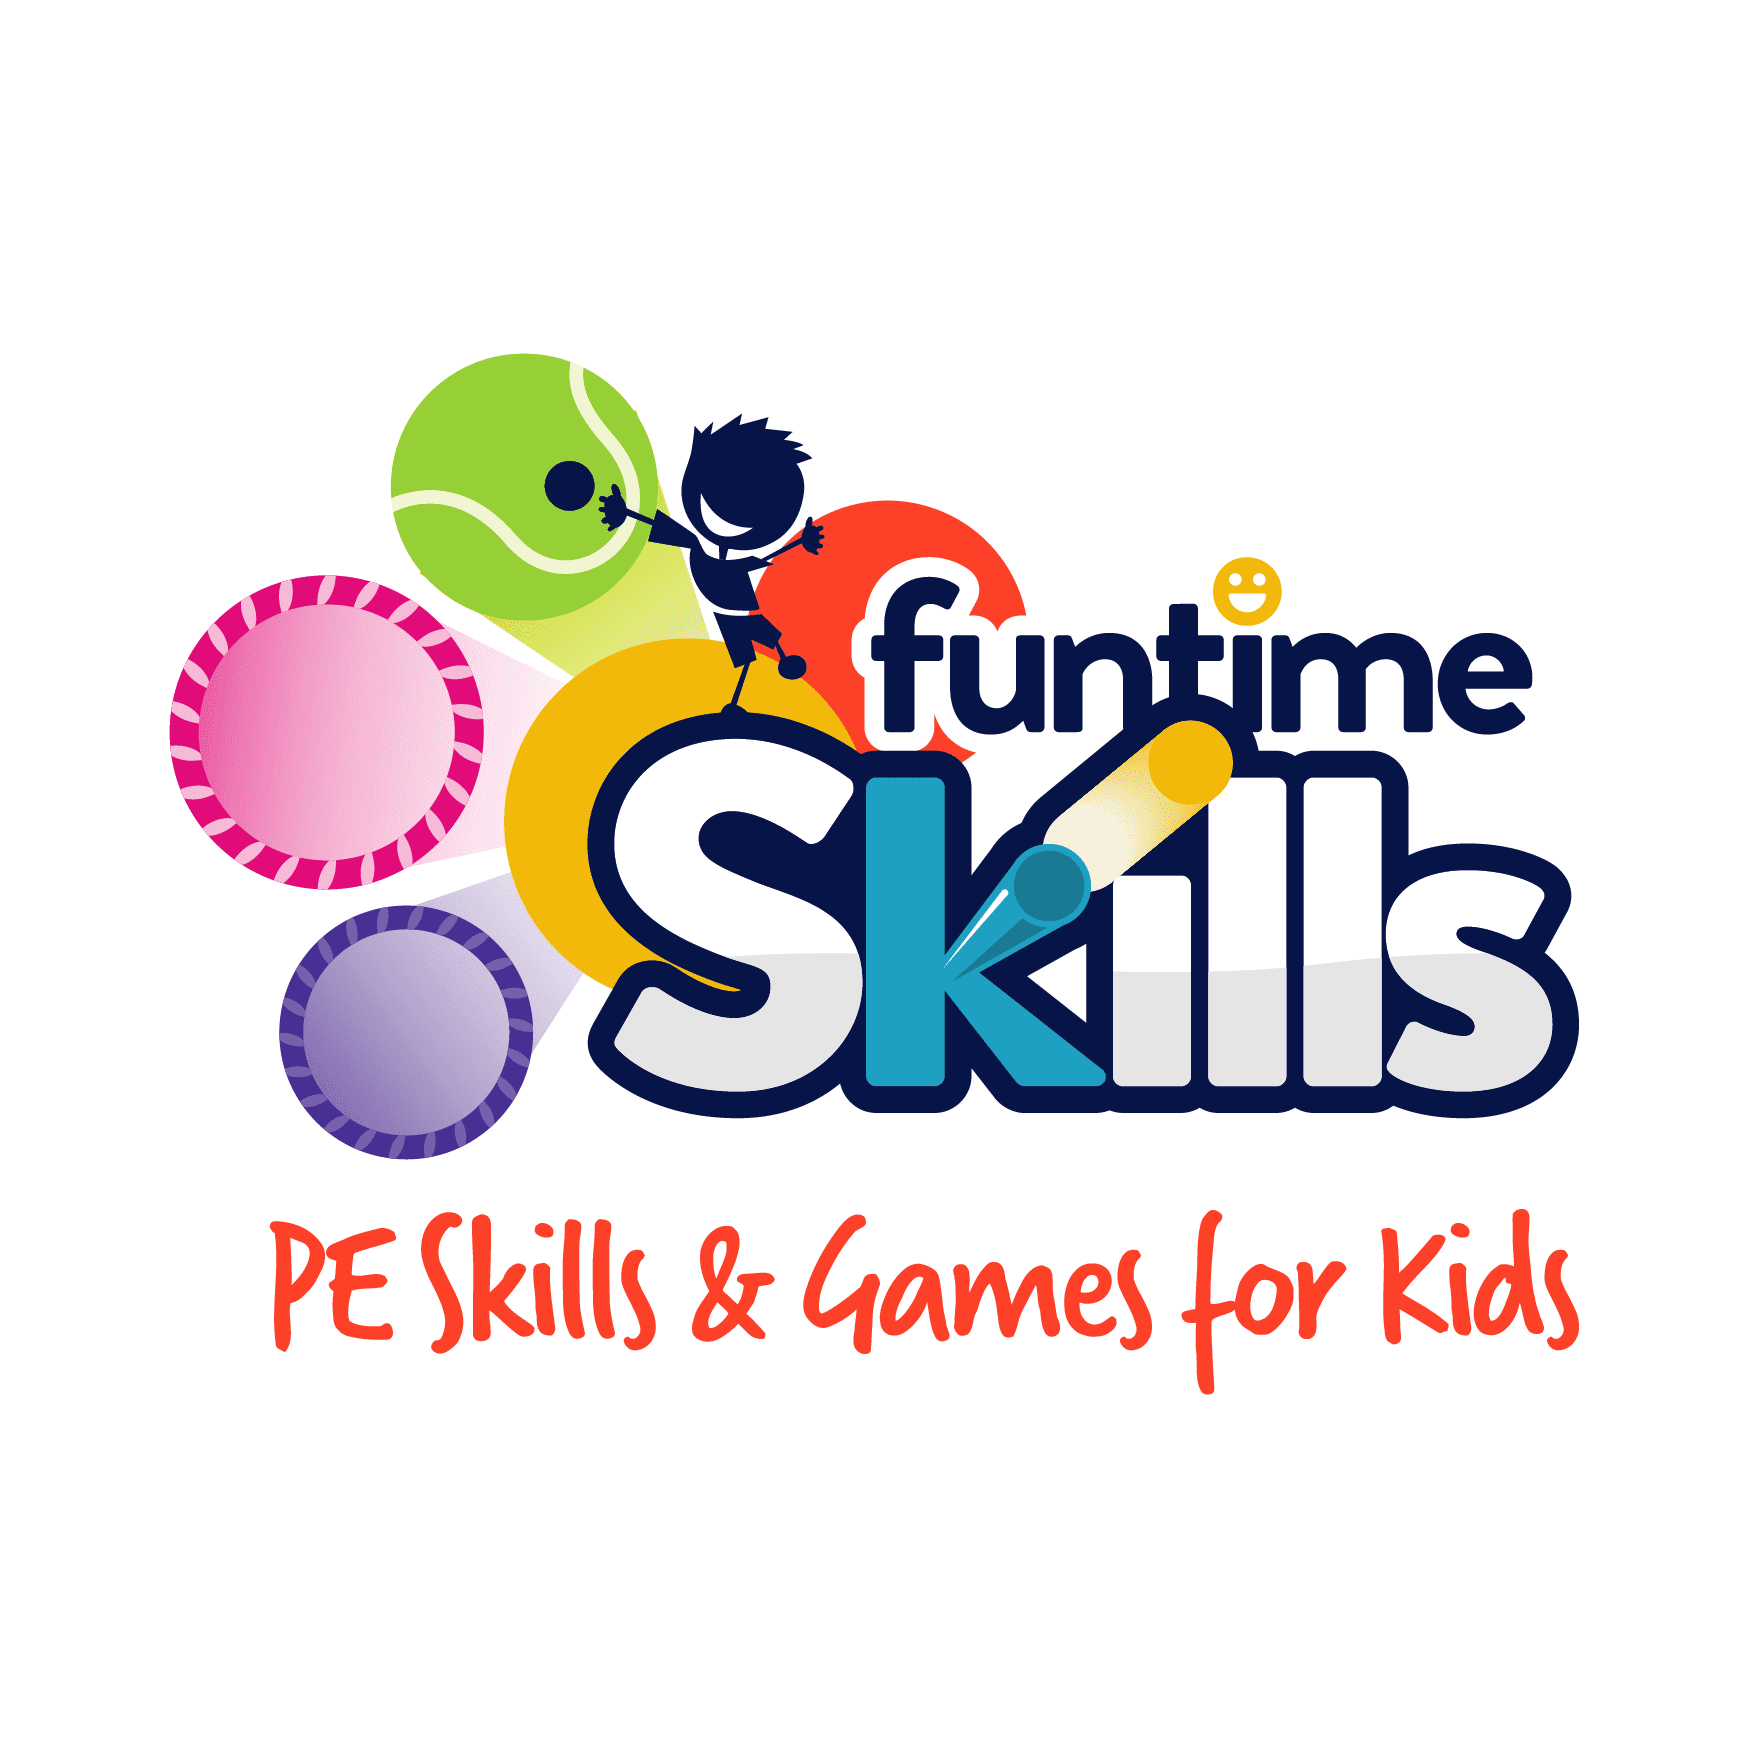 Funtime - PE Skills and Games for Kids